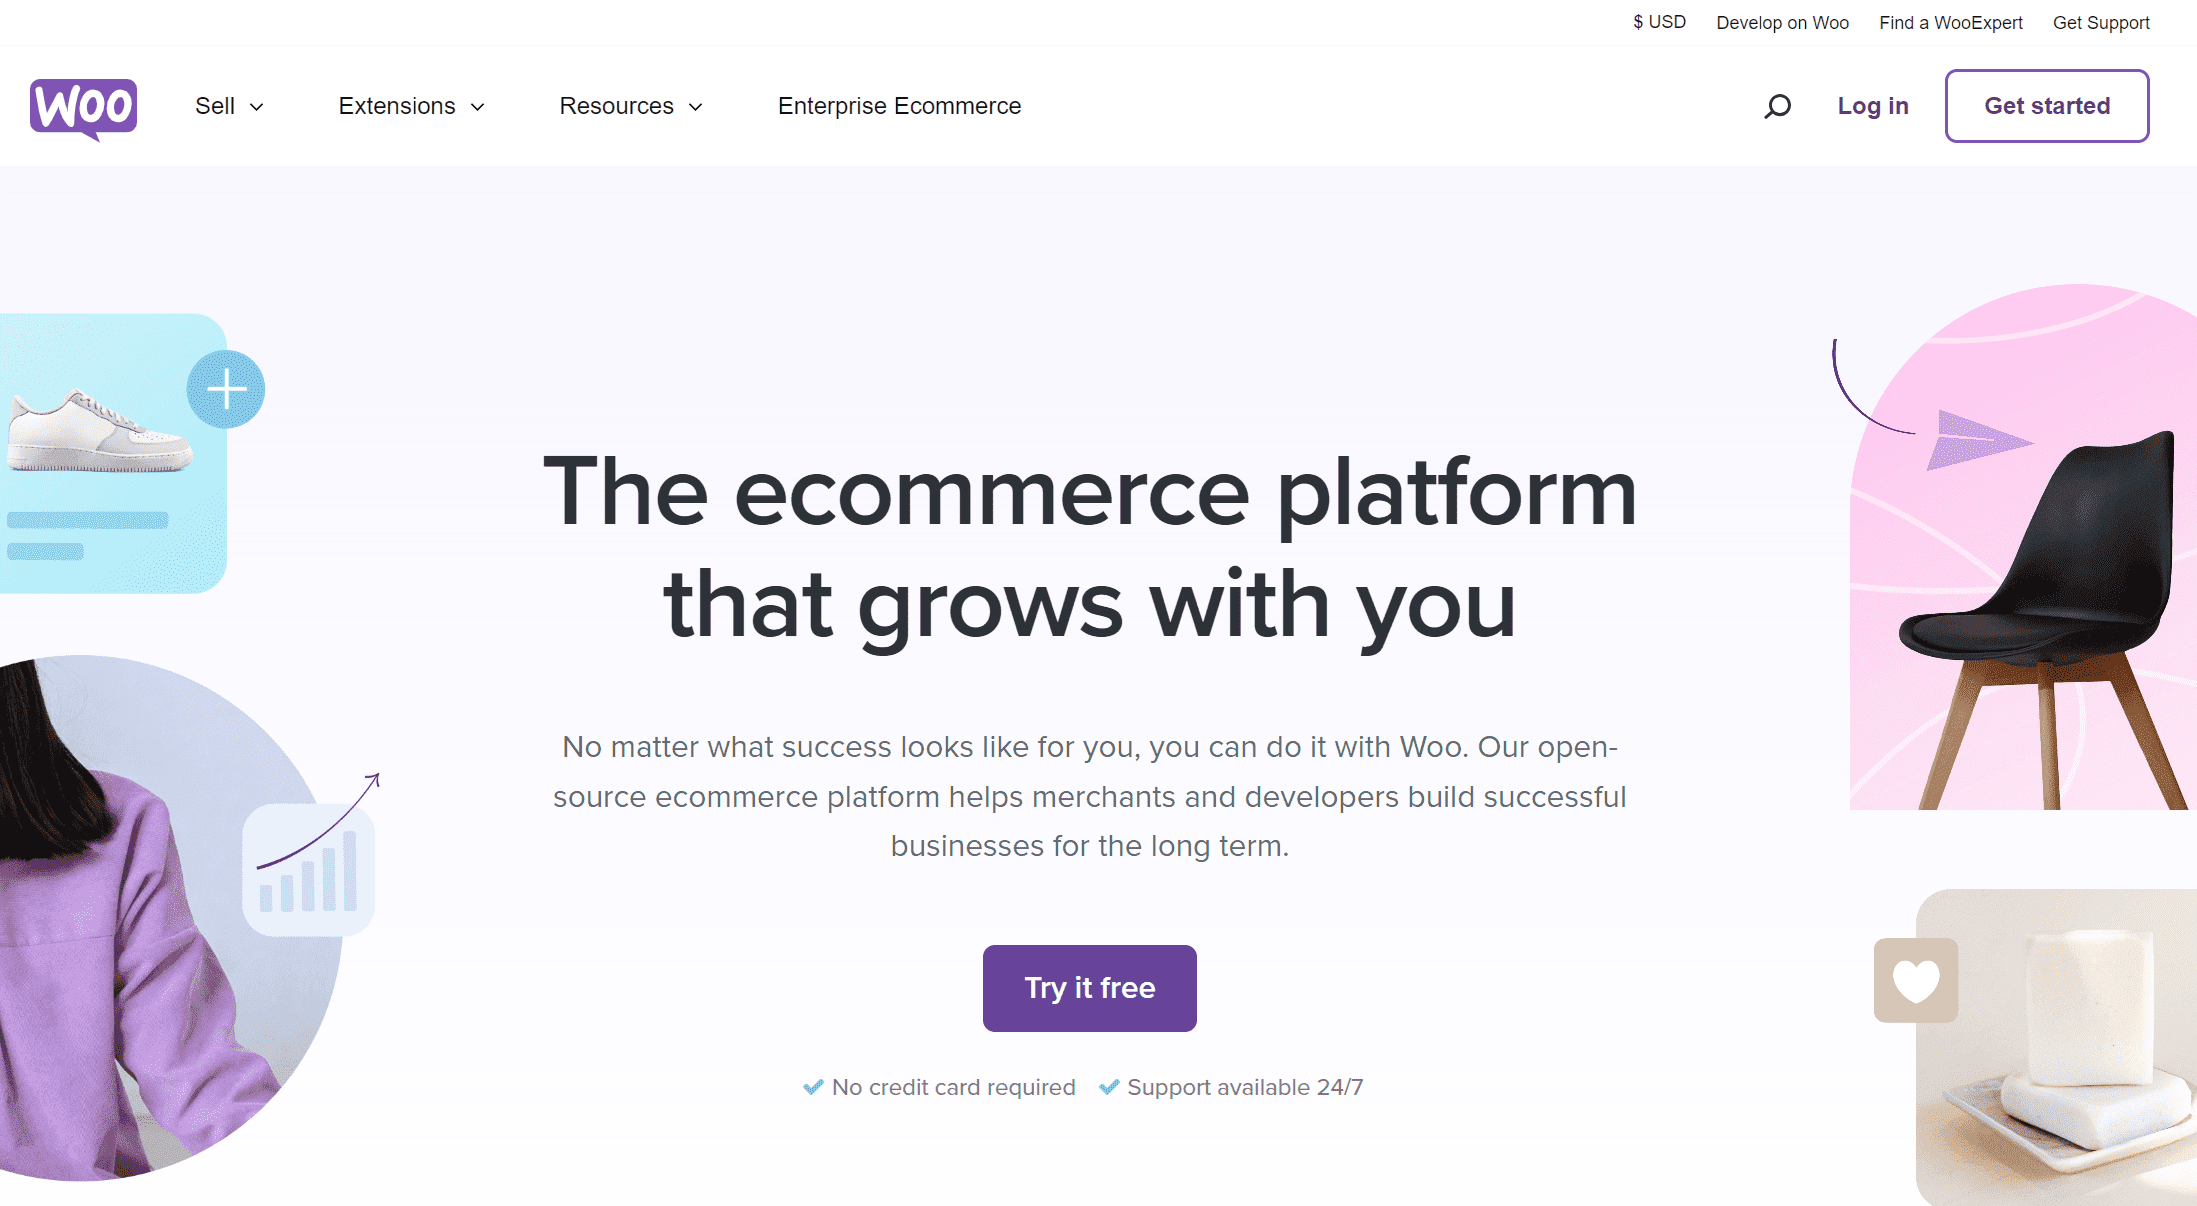 WooCommerce online shopping software